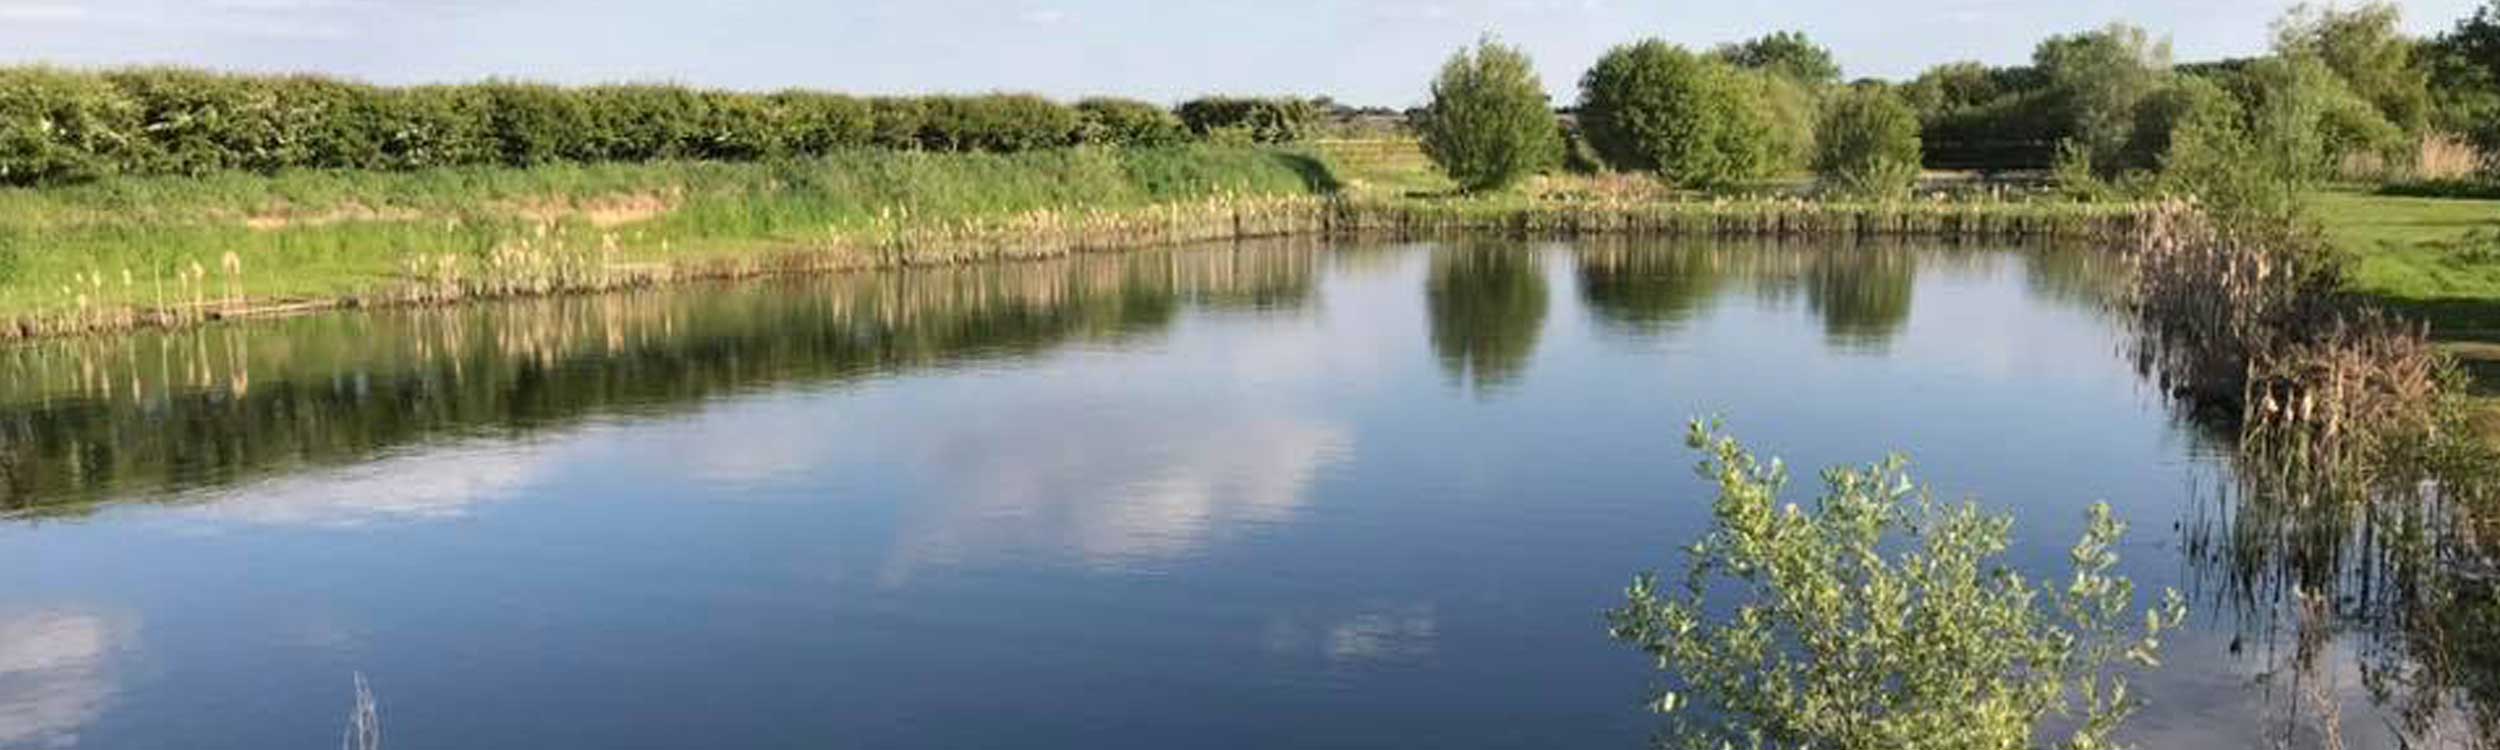 Fishing at Torworth Grange, Retford, Notts, fish in one of our many lakes filled with carp and a variety of silver fish, in peaceful surroundings with all the facilities, near worksop, tickhill, tuxford, harworth 